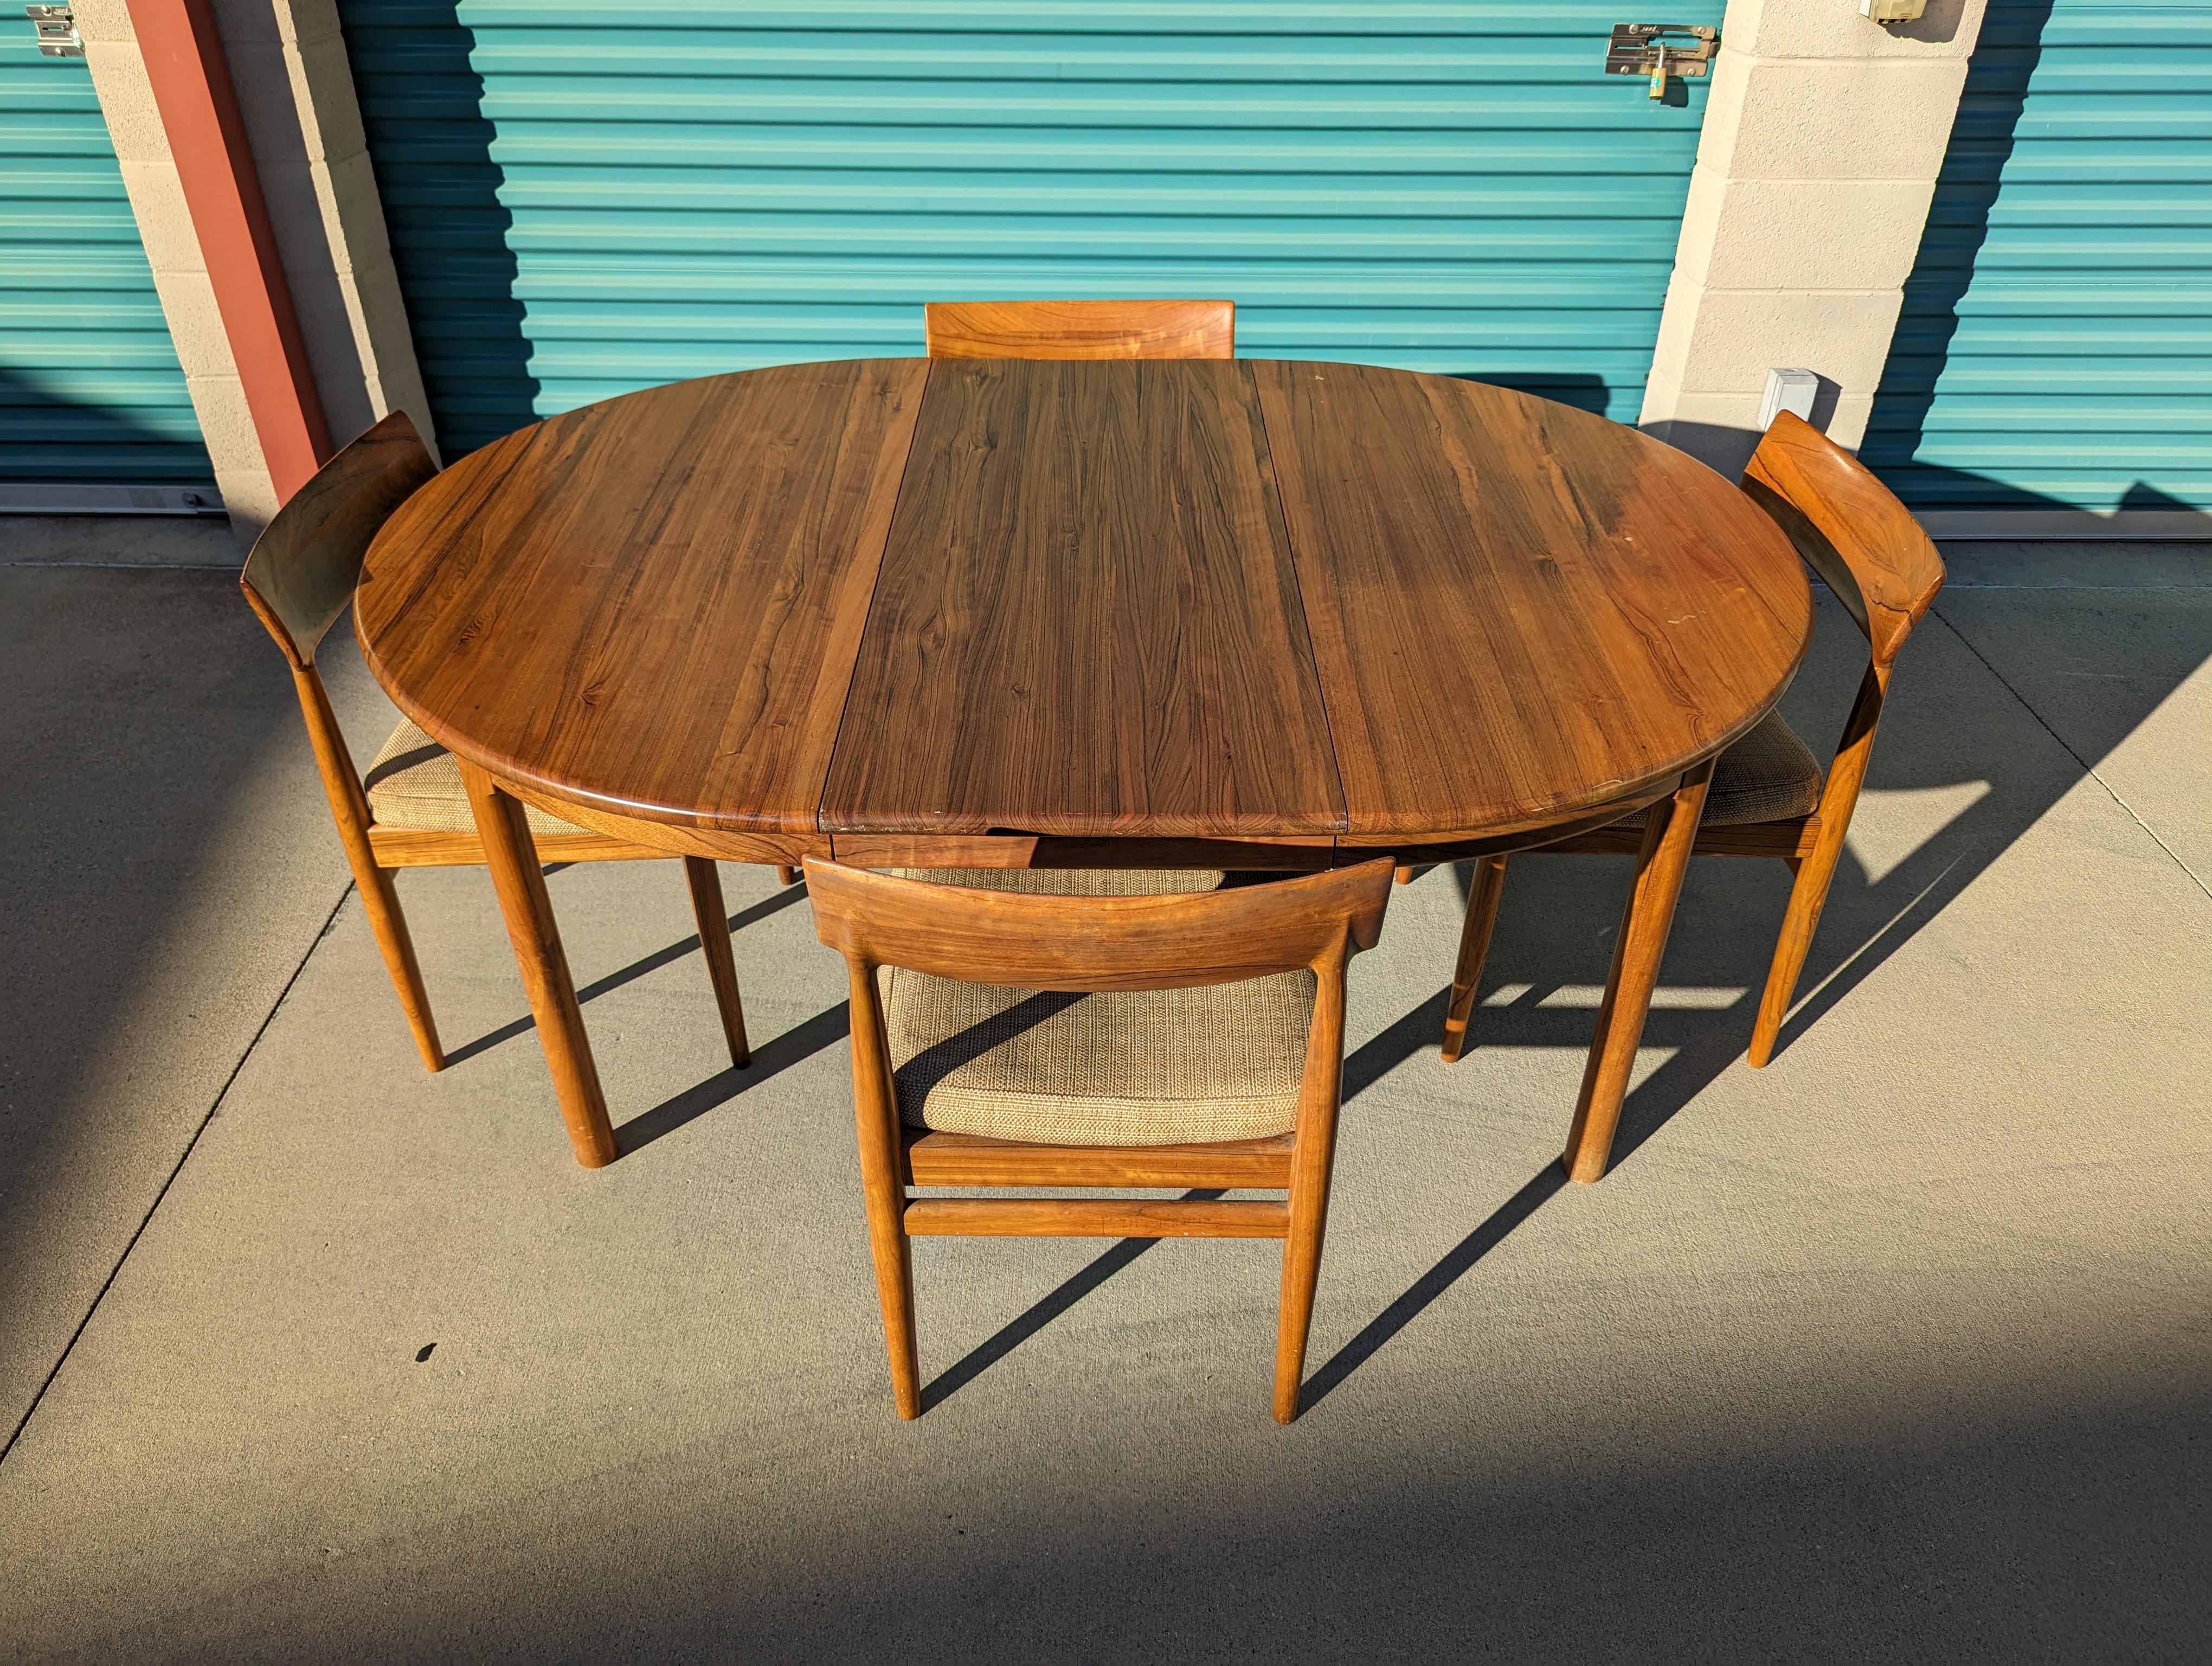 Delve into the elegance of the past with this exquisite vintage mid-century modern rosewood dining set. Inspired by timeless Danish design and crafted with care in the Philippines, this ensemble is a unique fusion of global aesthetics and